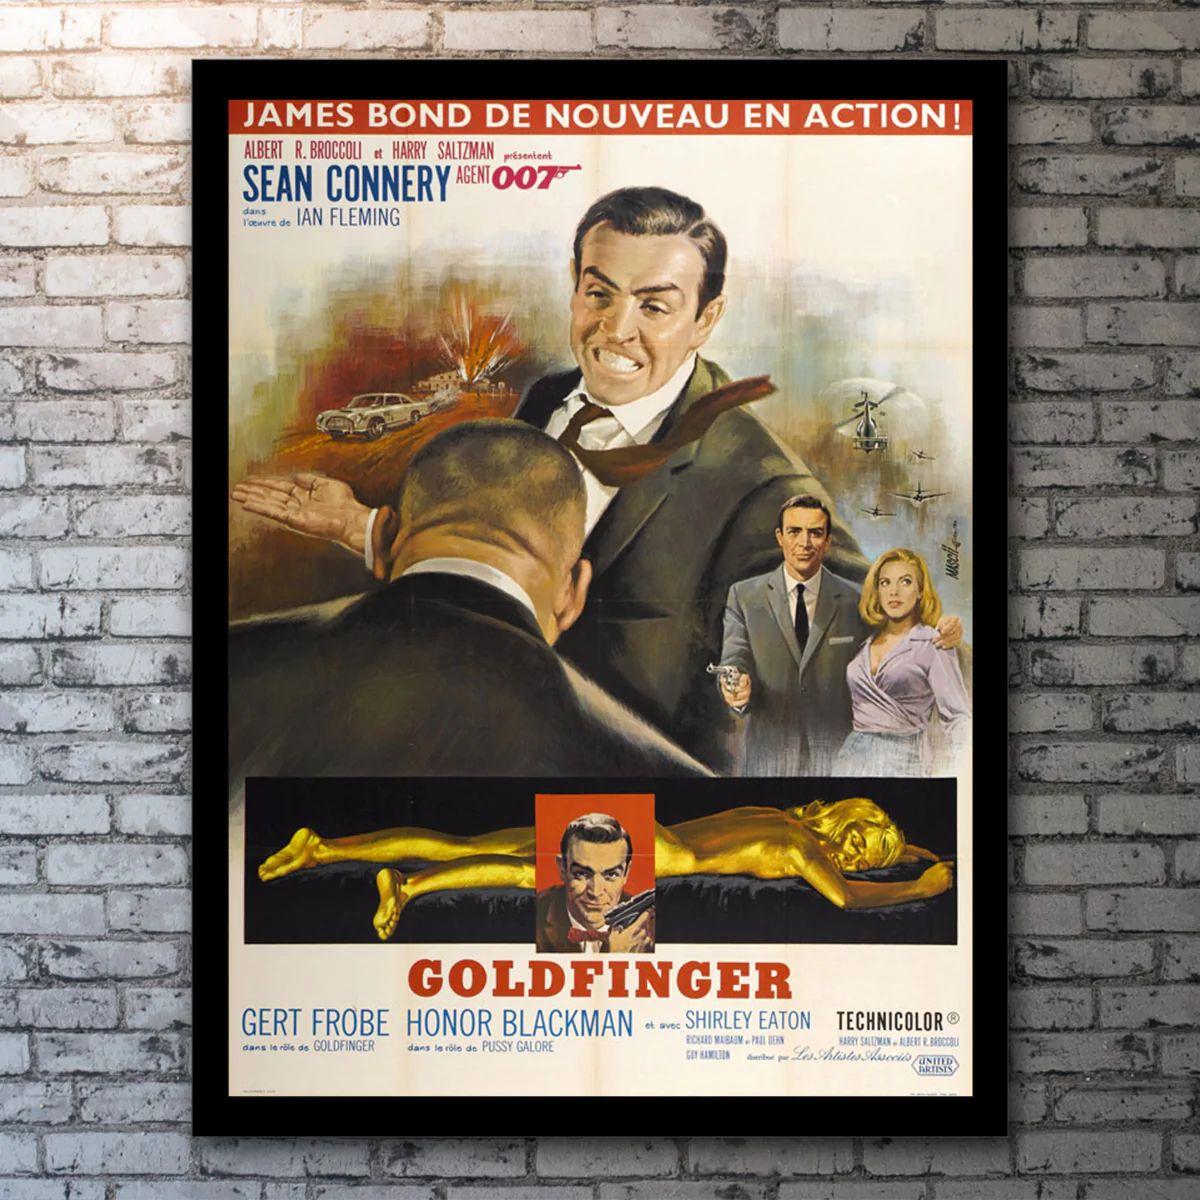 Goldfinger, Unframed Poster, 1964

Original One Panel (47 X 63 Inches). The posters for this Bond title are more sought after than any of the others. Sean Connery reprised his role as Ian Fleming's master spy James Bond in this, the third